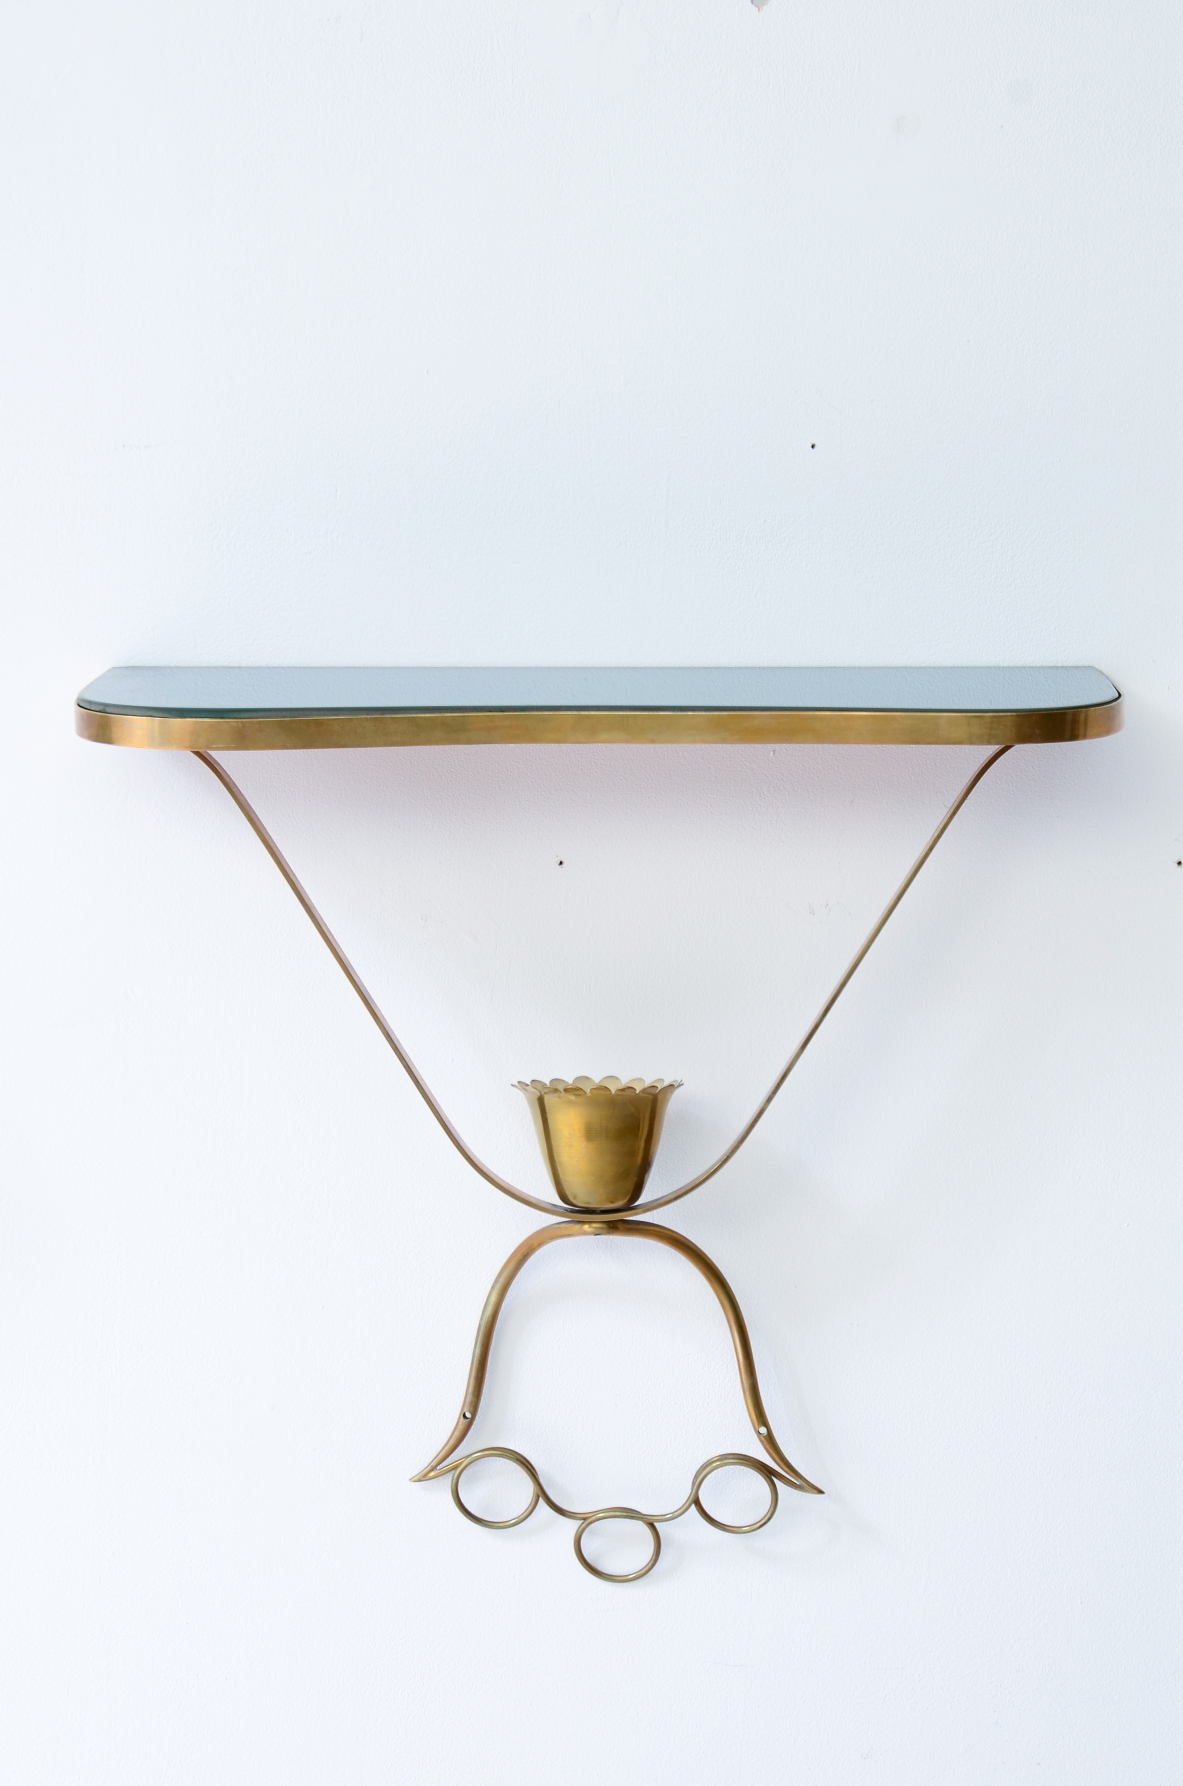 Pierluigi Colli (1895-1968)  Pair of small brass consoles with opaline glass top.    Italian manufacture, approx. 1950.